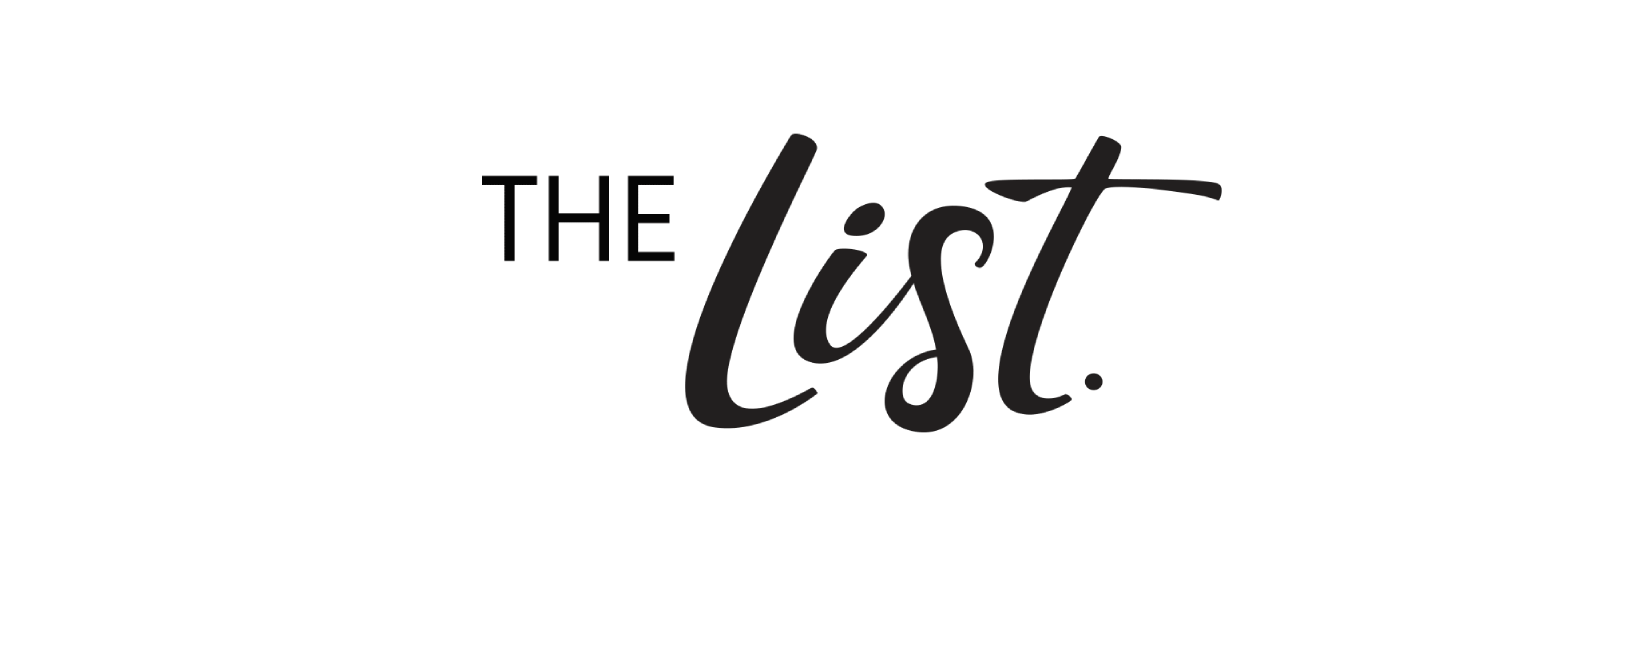 THE LIST Discount Code 2023